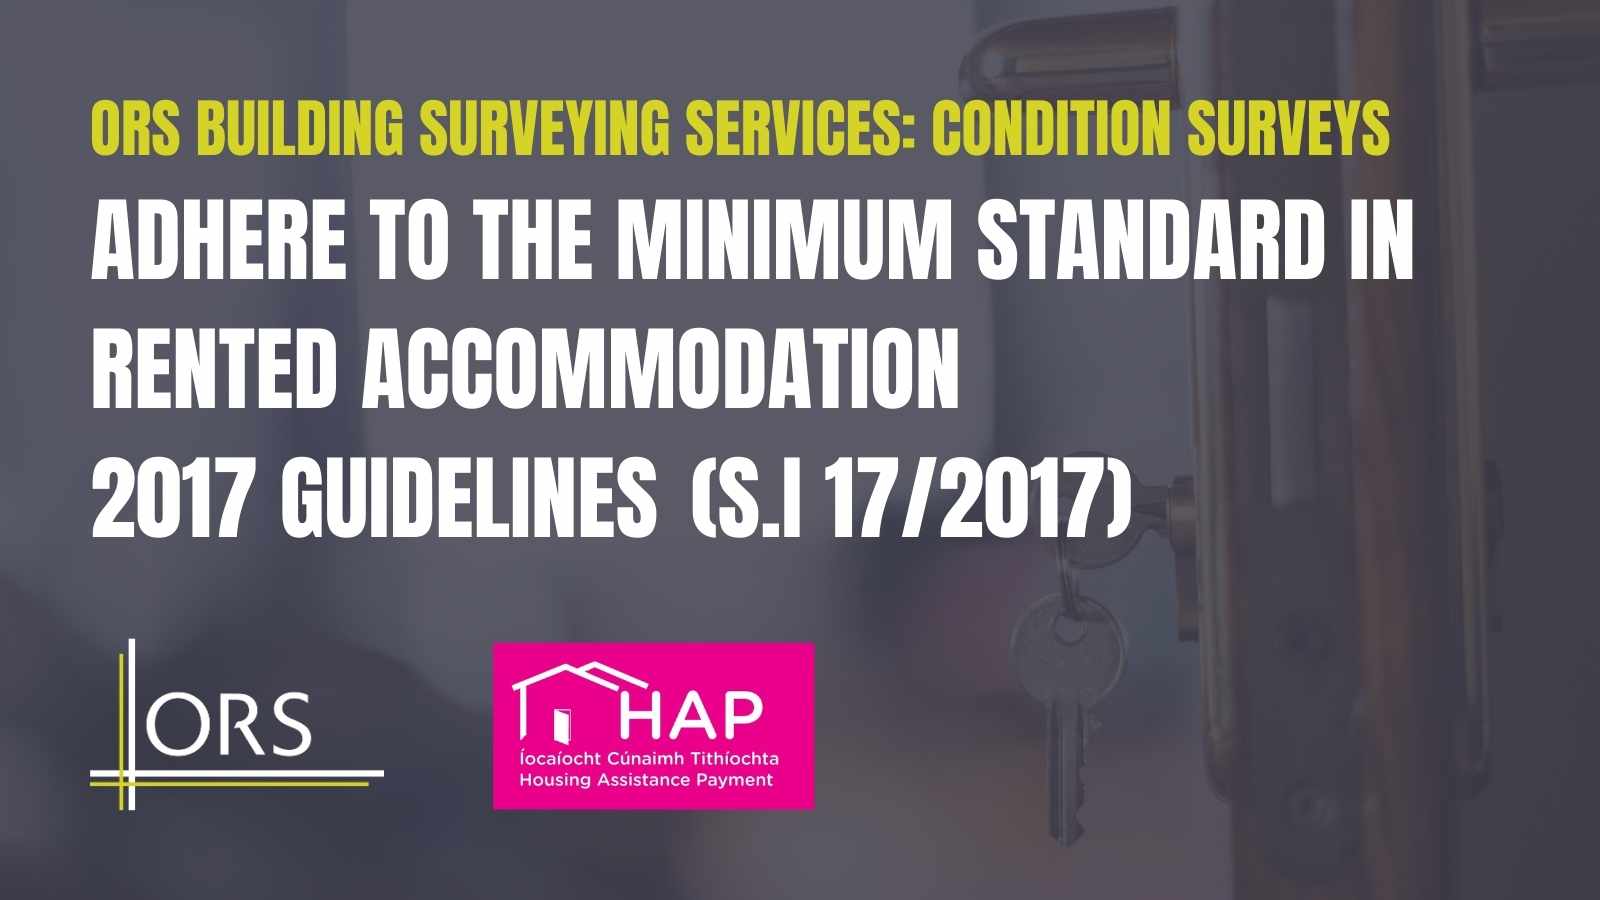 ADHERING TO THE MINIMUM STANDARDS IN RENTED ACCOMMODATION 2017 GUIDELINES S.I 17 2017